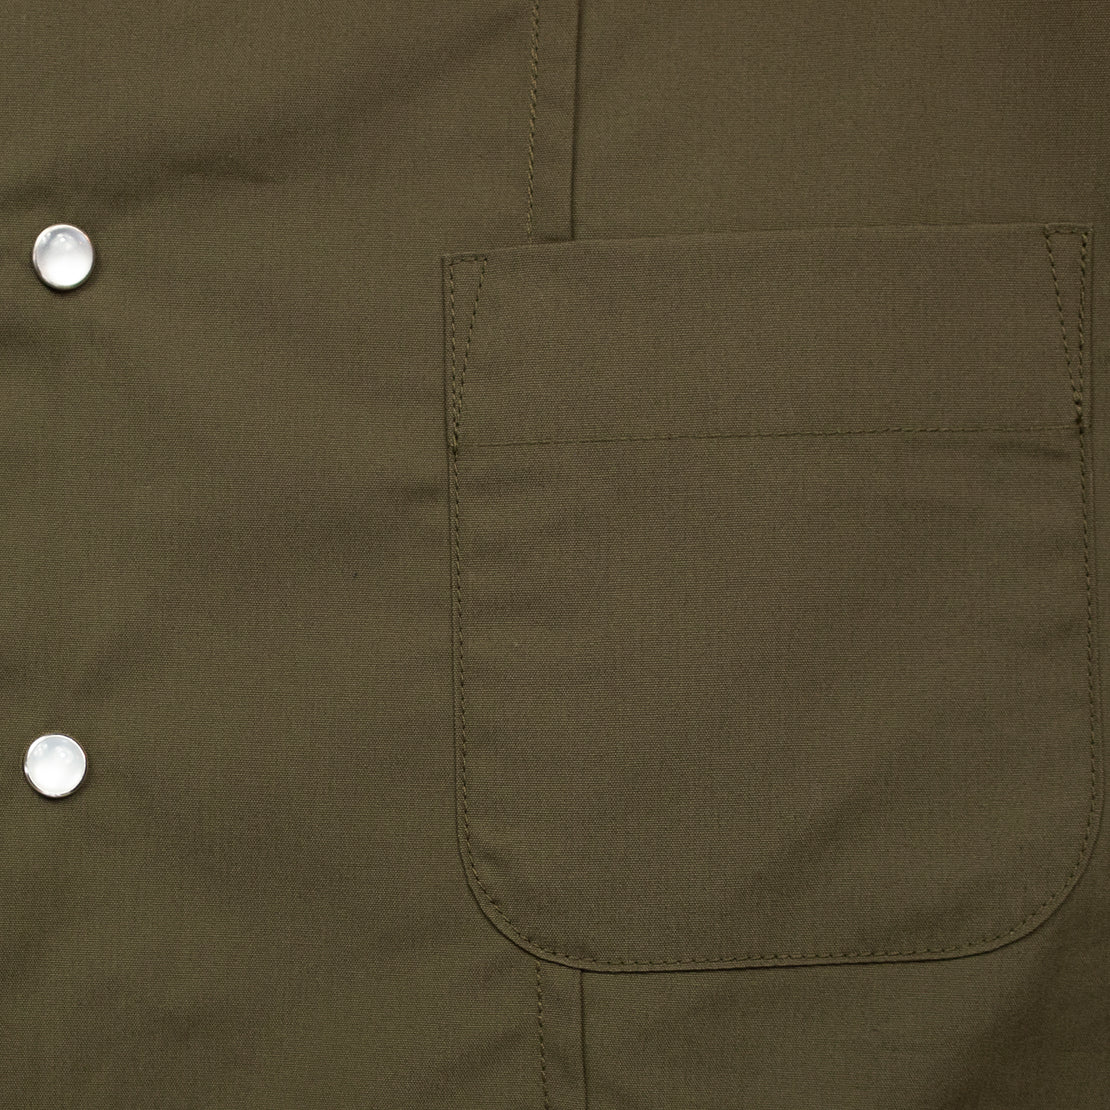 Ura Weekend Shirt - Olive - Monitaly - STAG Provisions - Tops - S/S Woven - Solid